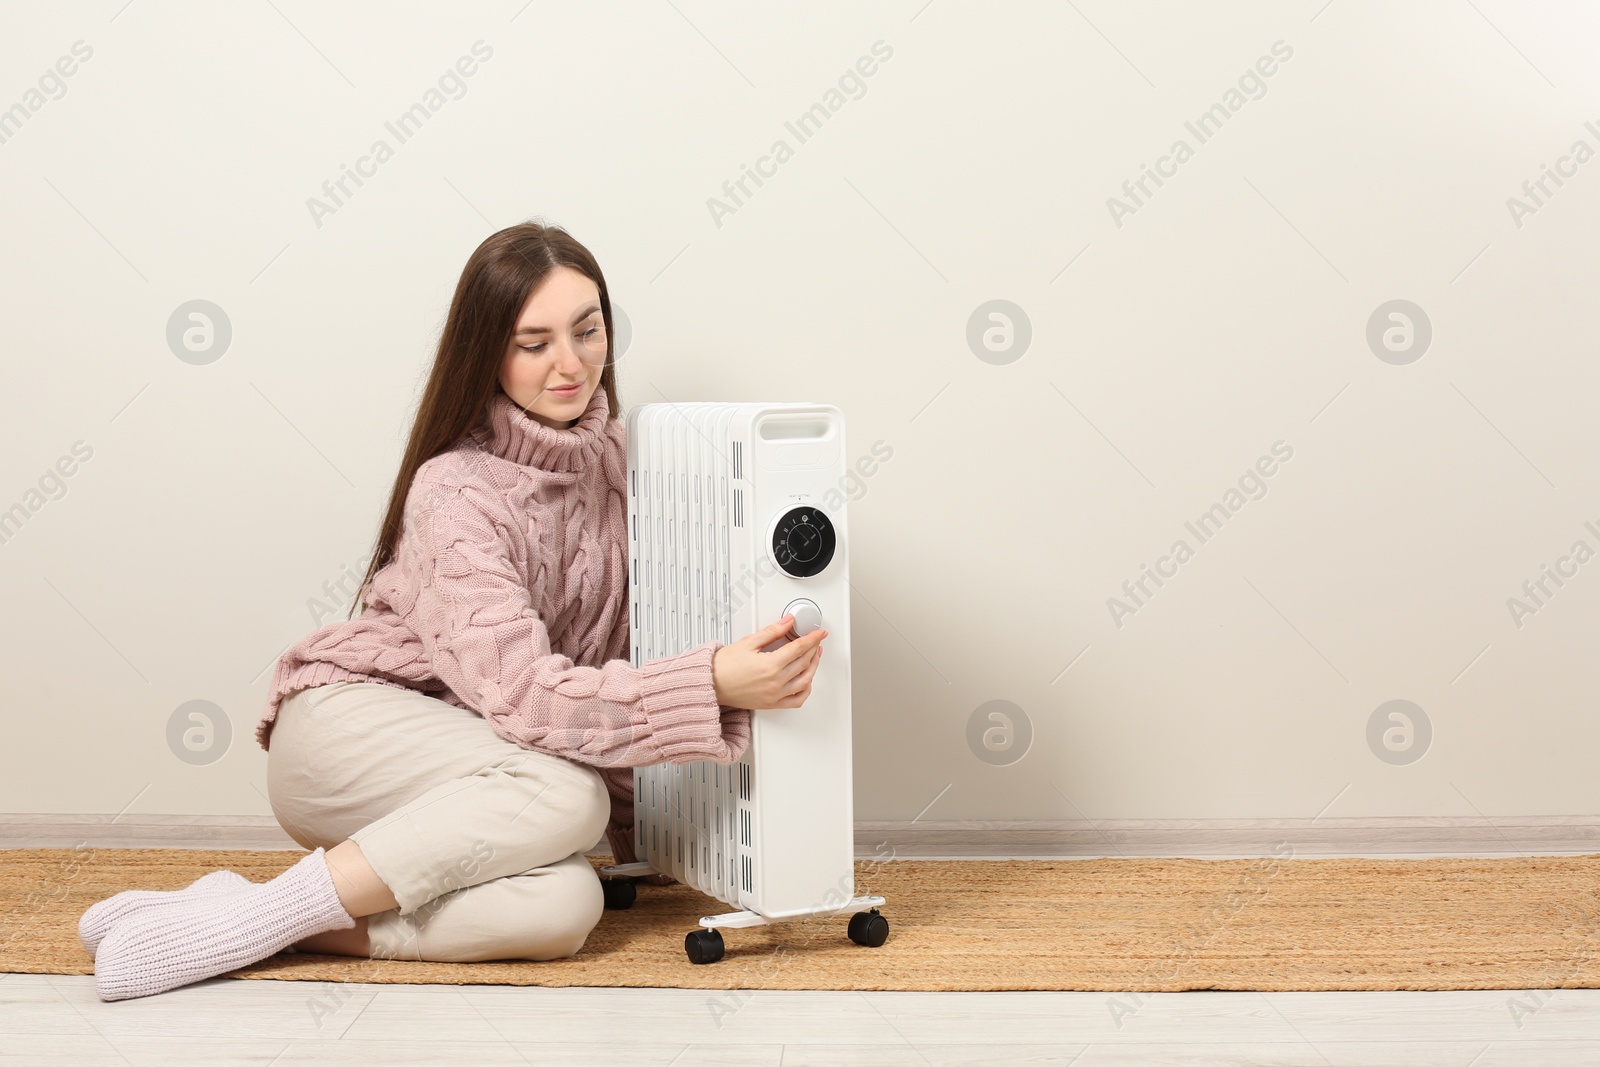 Photo of Young woman adjusting temperature on modern electric heater near beige wall, space for text